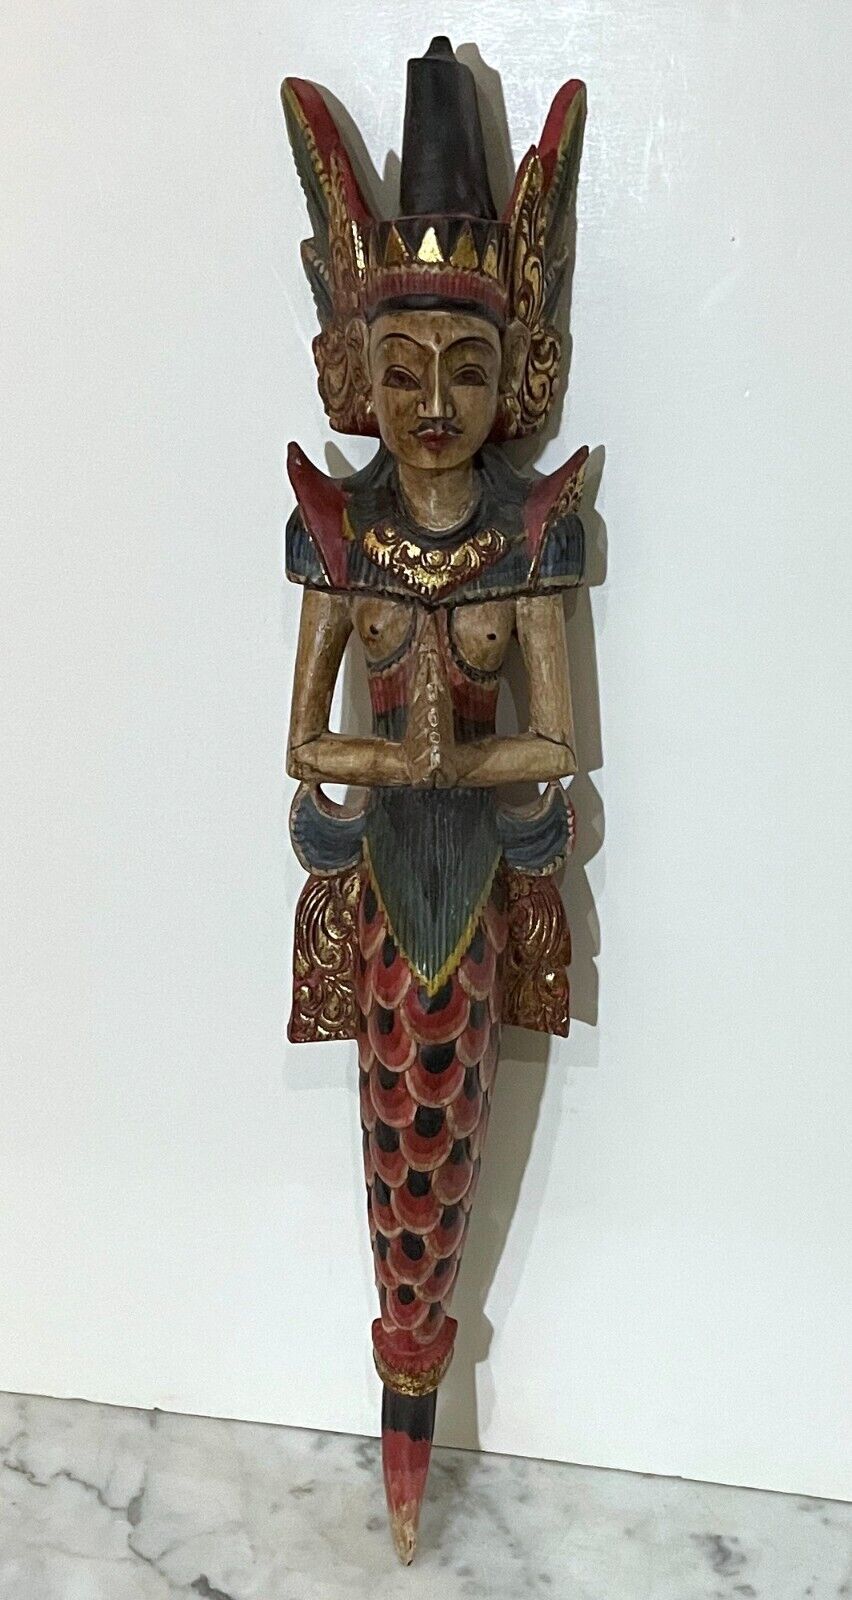 GORGEOUS VINTAGE BALINESE HINDU PAINTED WOOD STATUE OF A MALE FIGURE PRAYING